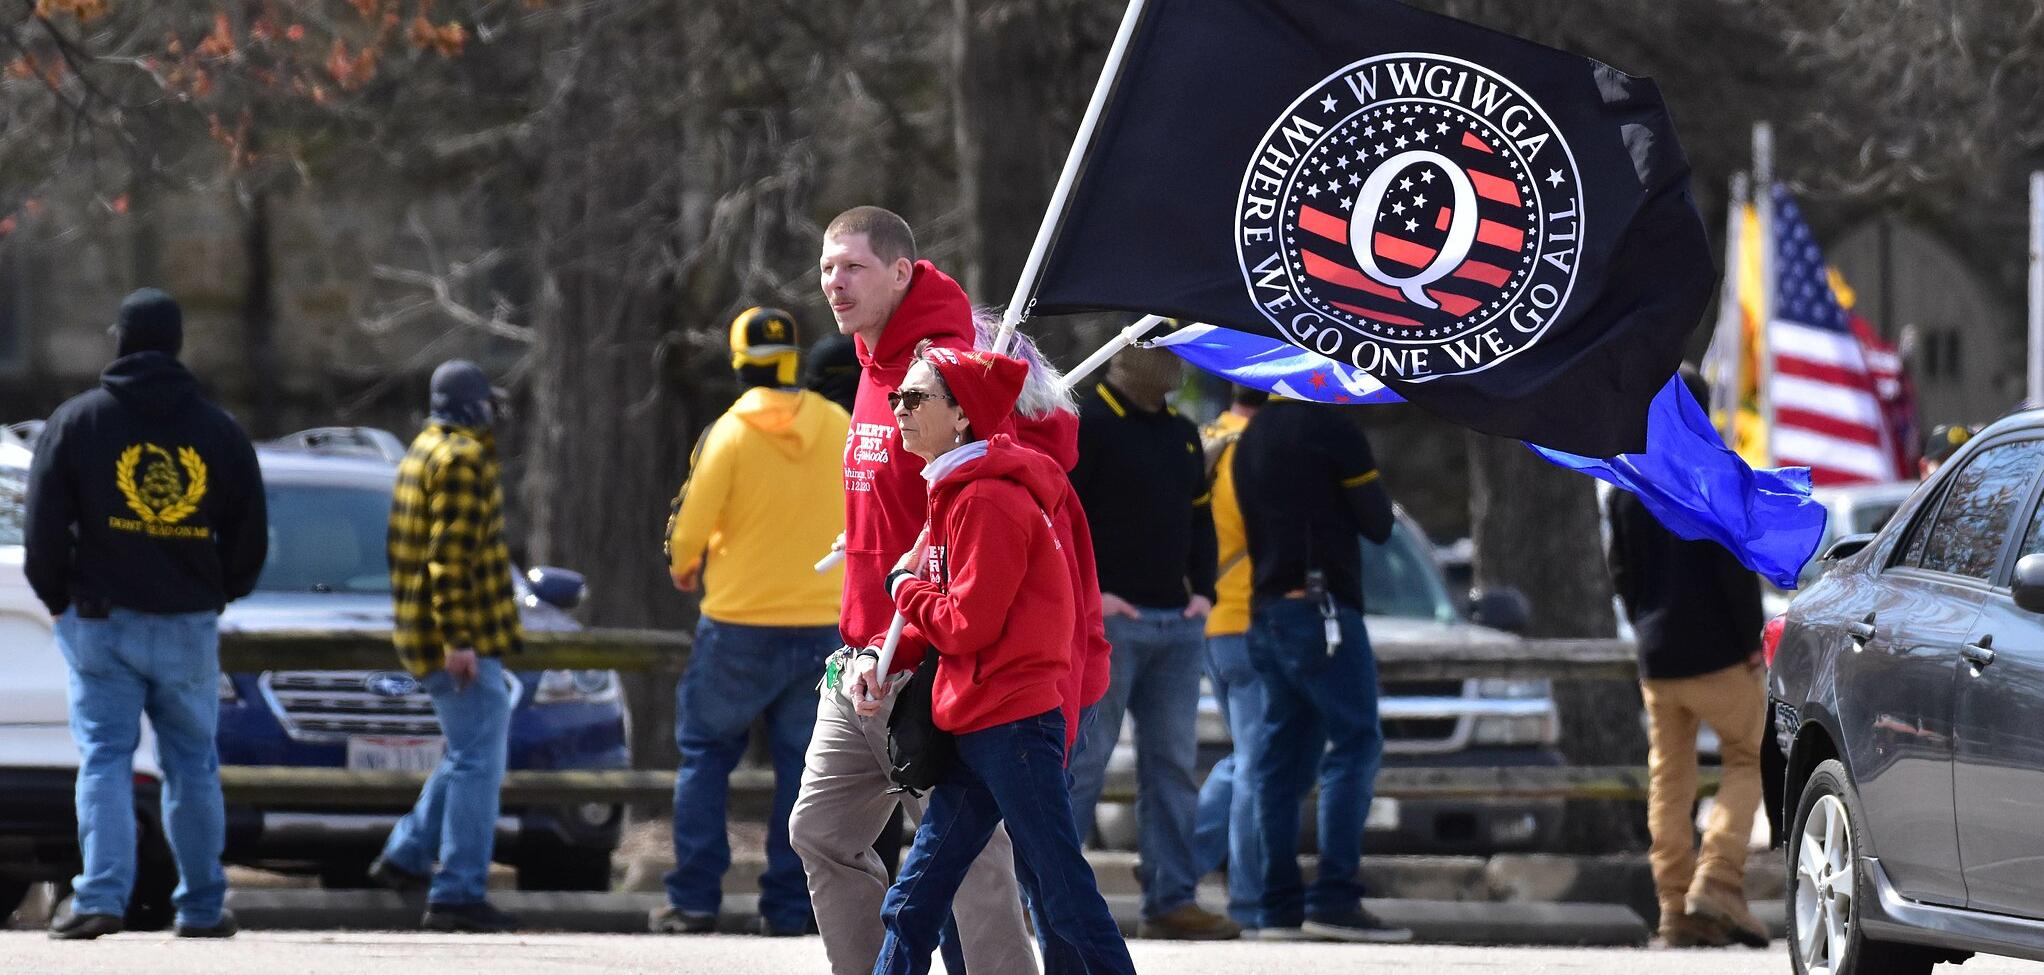 Two people in red hoodies carrying a QAnon flag